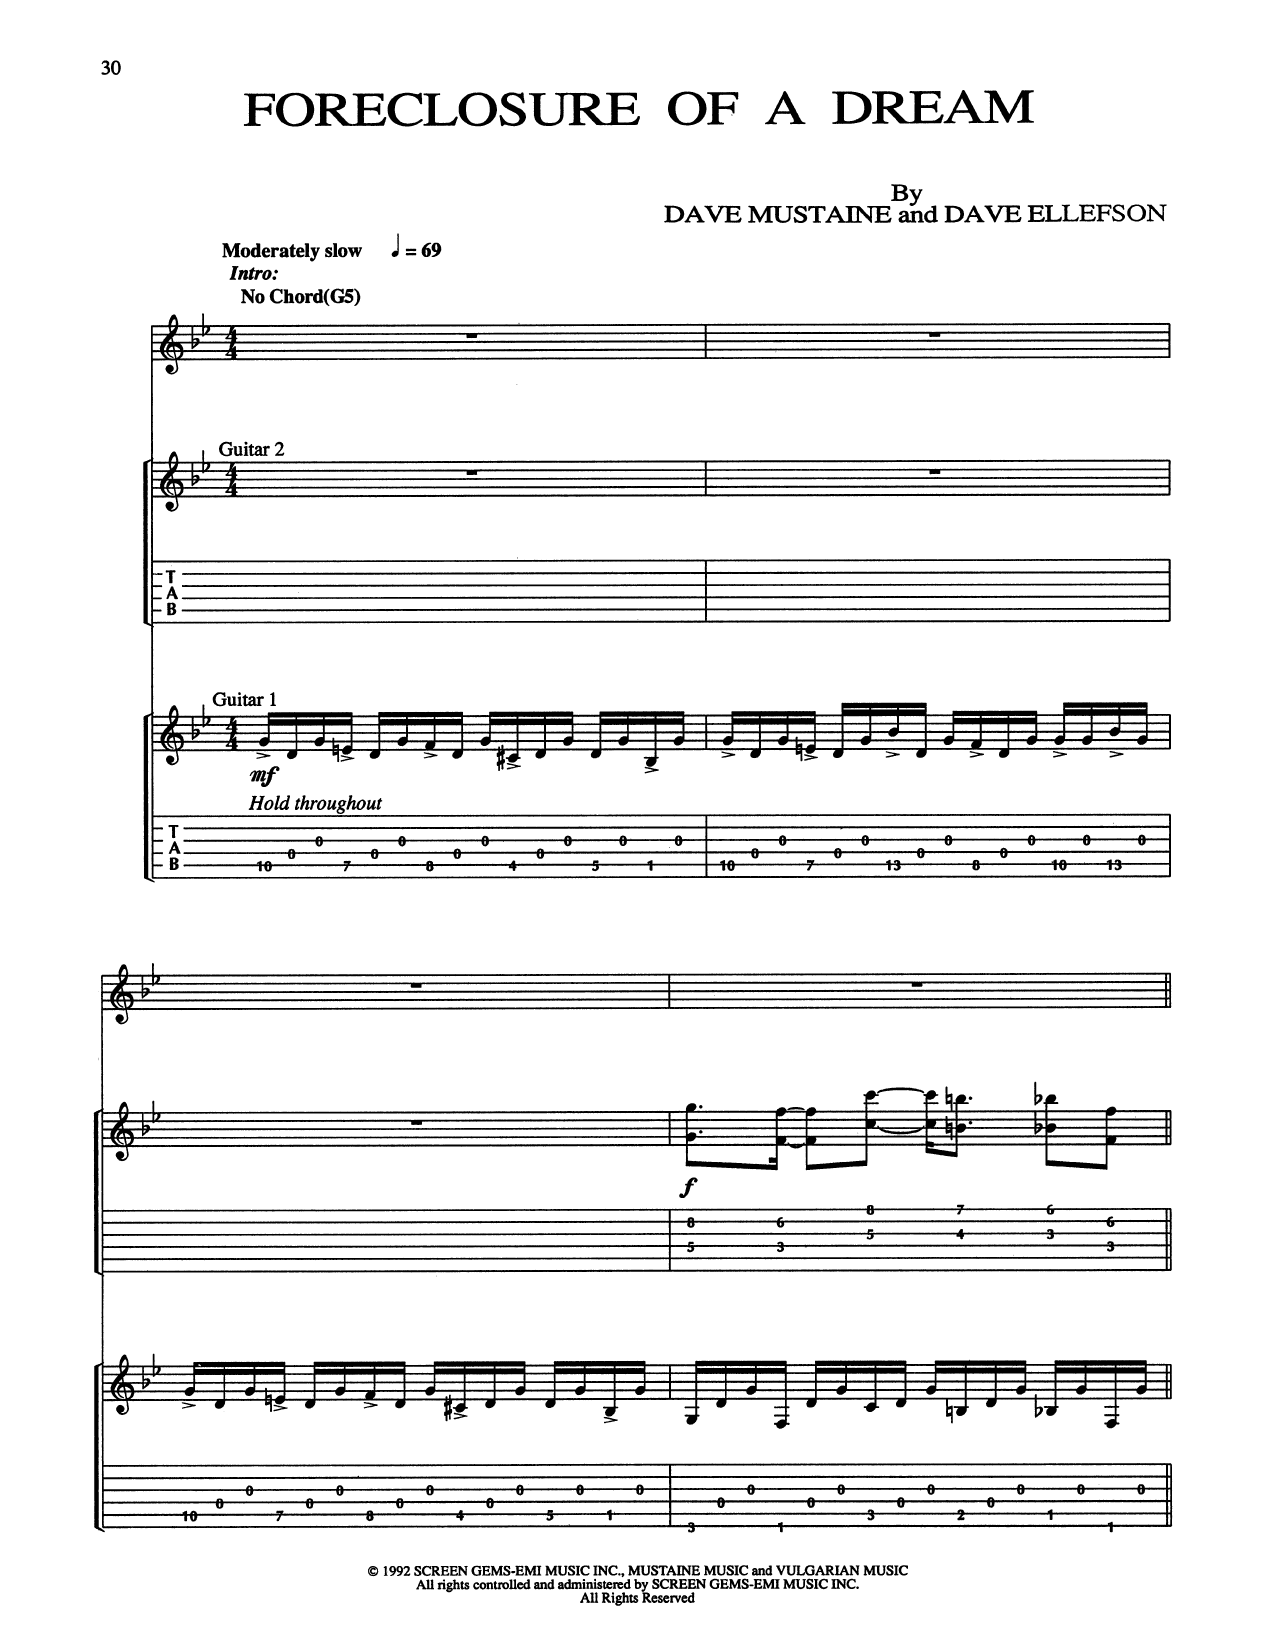 Download Megadeth Foreclosure Of A Dream Sheet Music